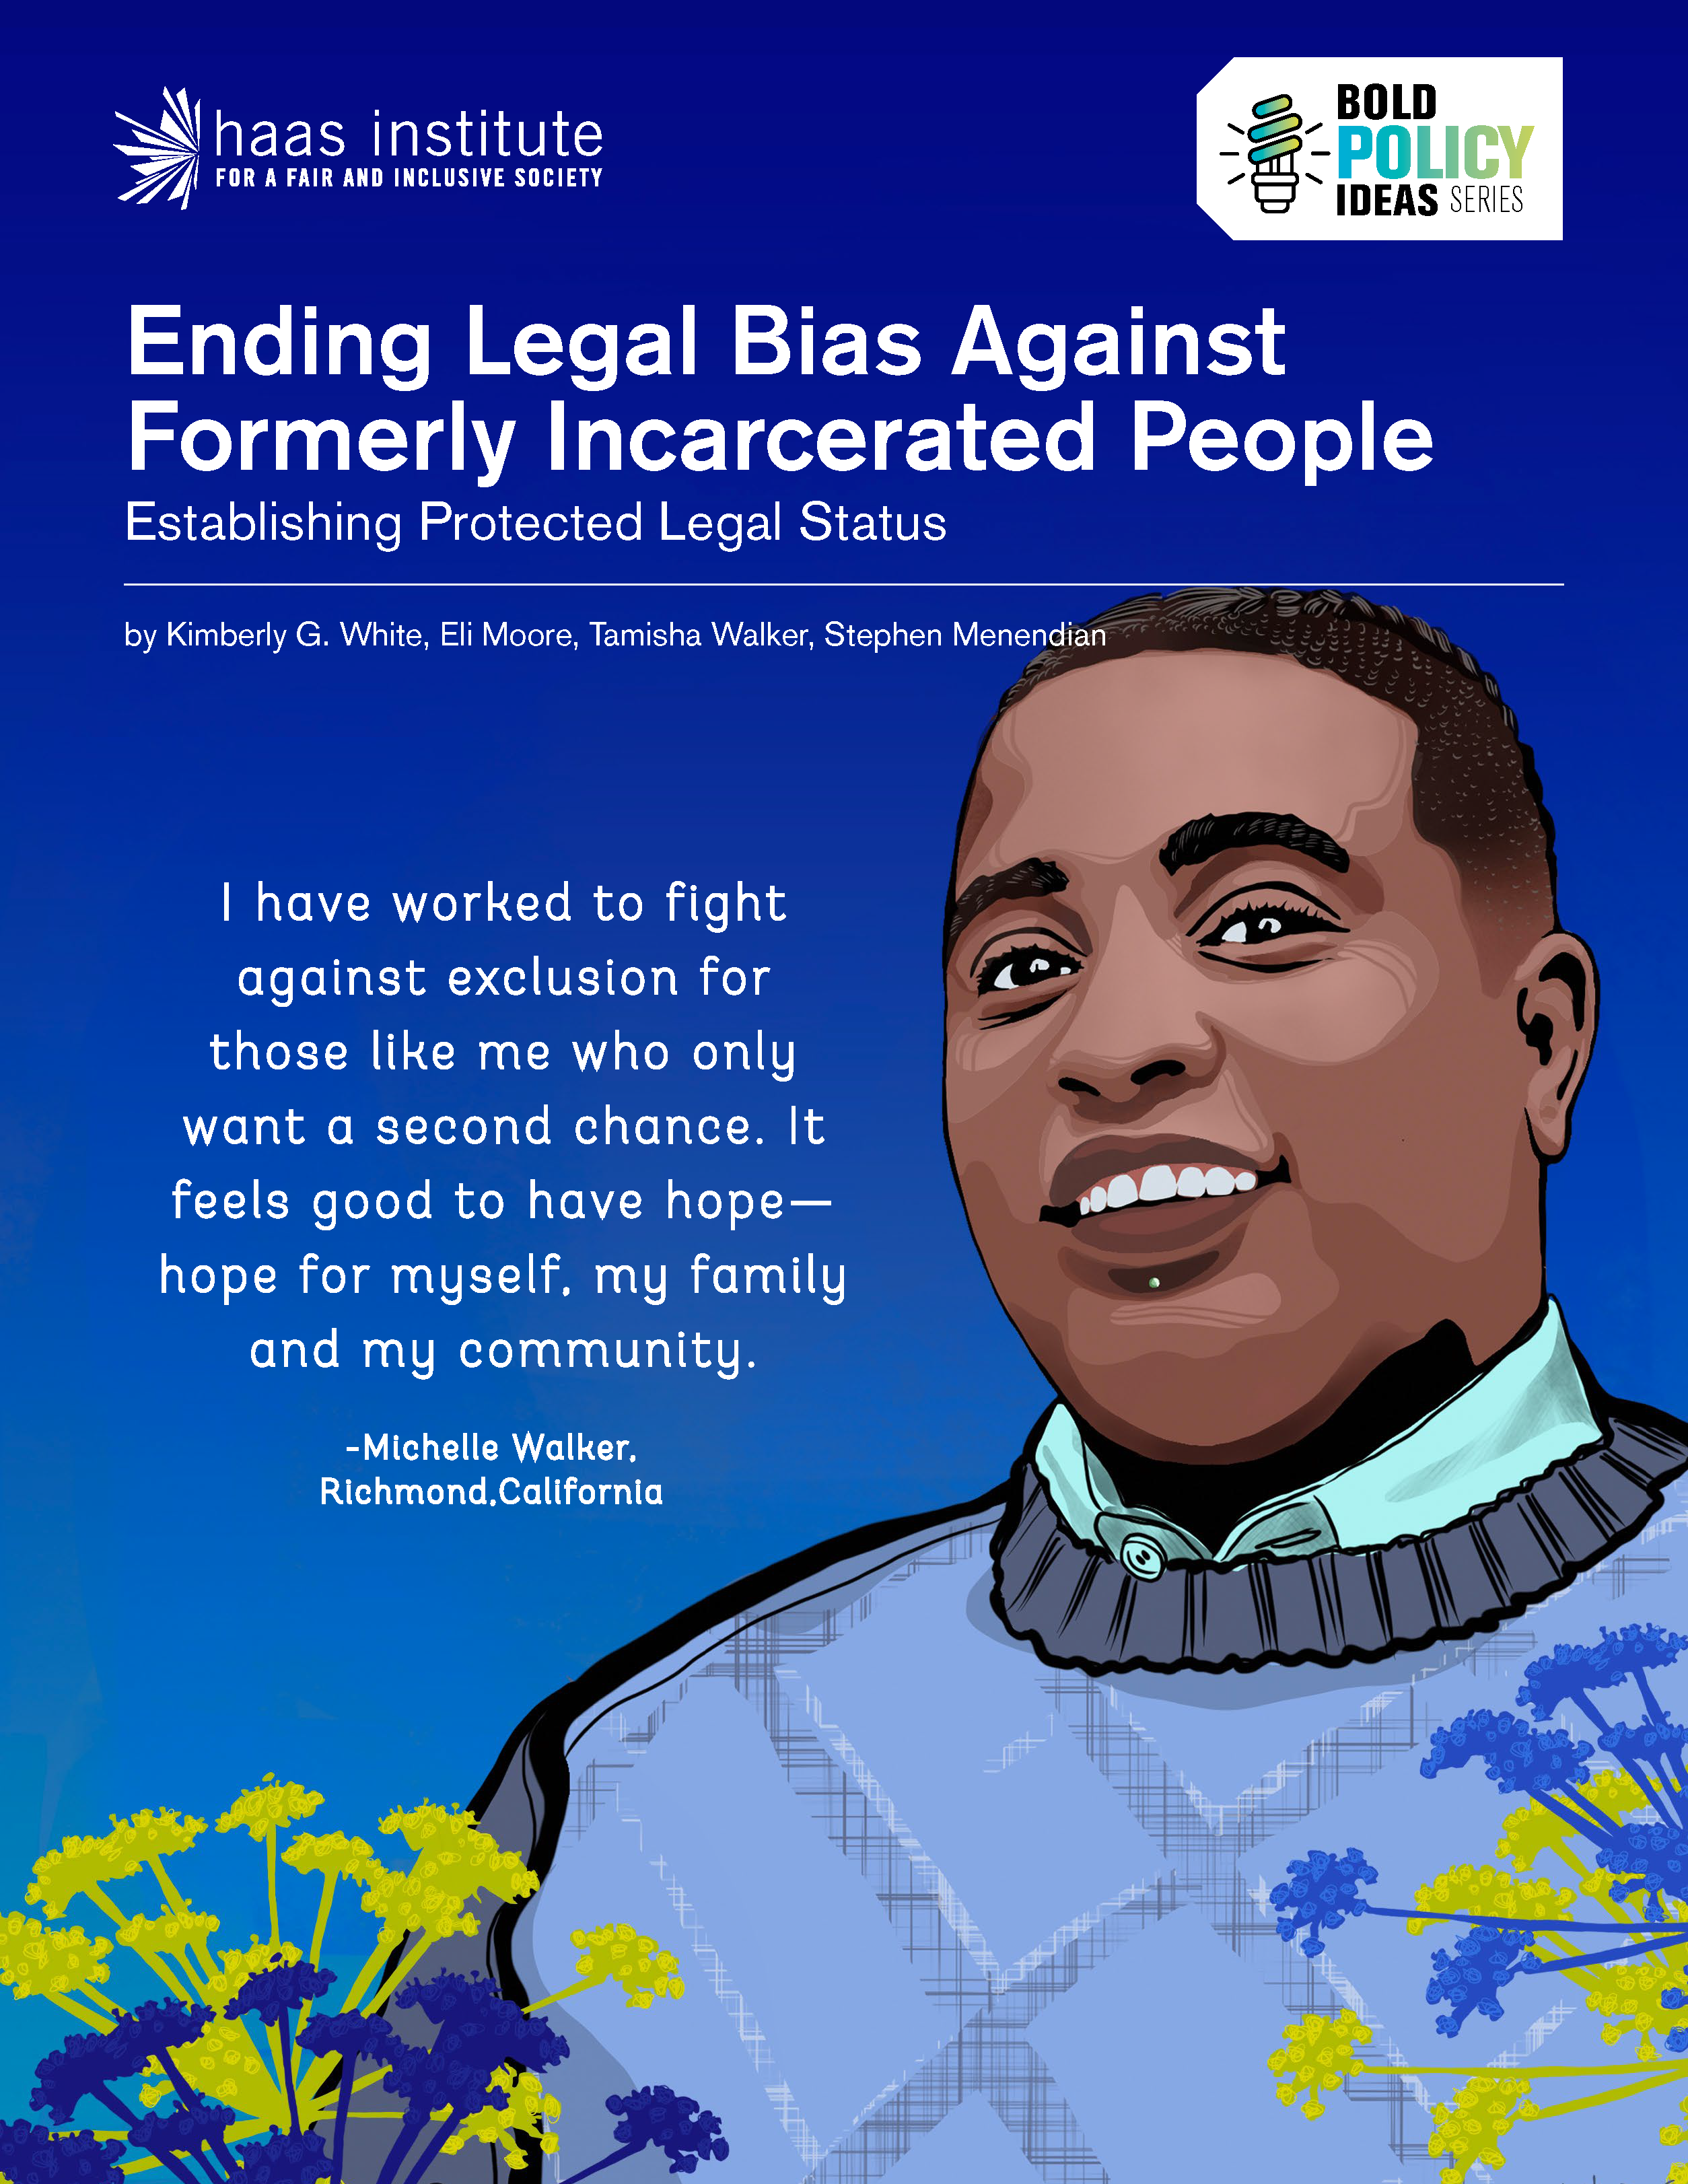 Ending Legal Bias Against Formerly Incarcerated People cover image shows an illustration of a young black man smiling